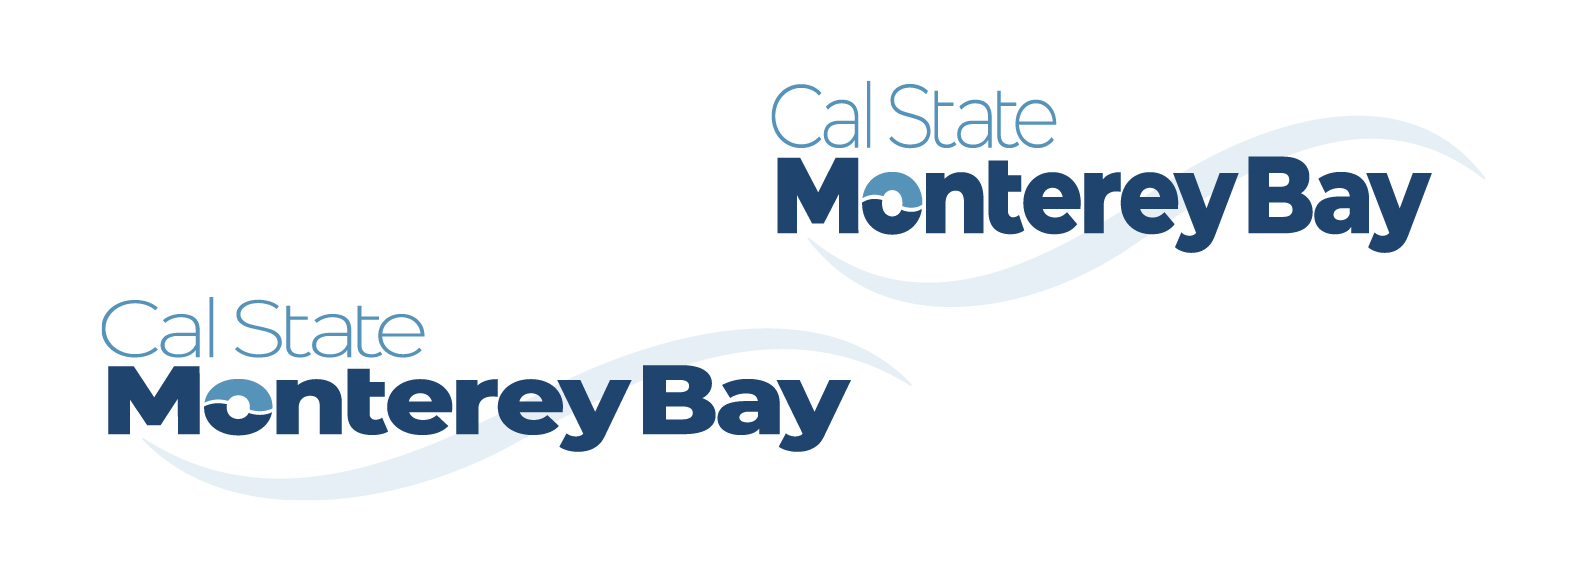 Cal State Monterey Bay Logo distorted